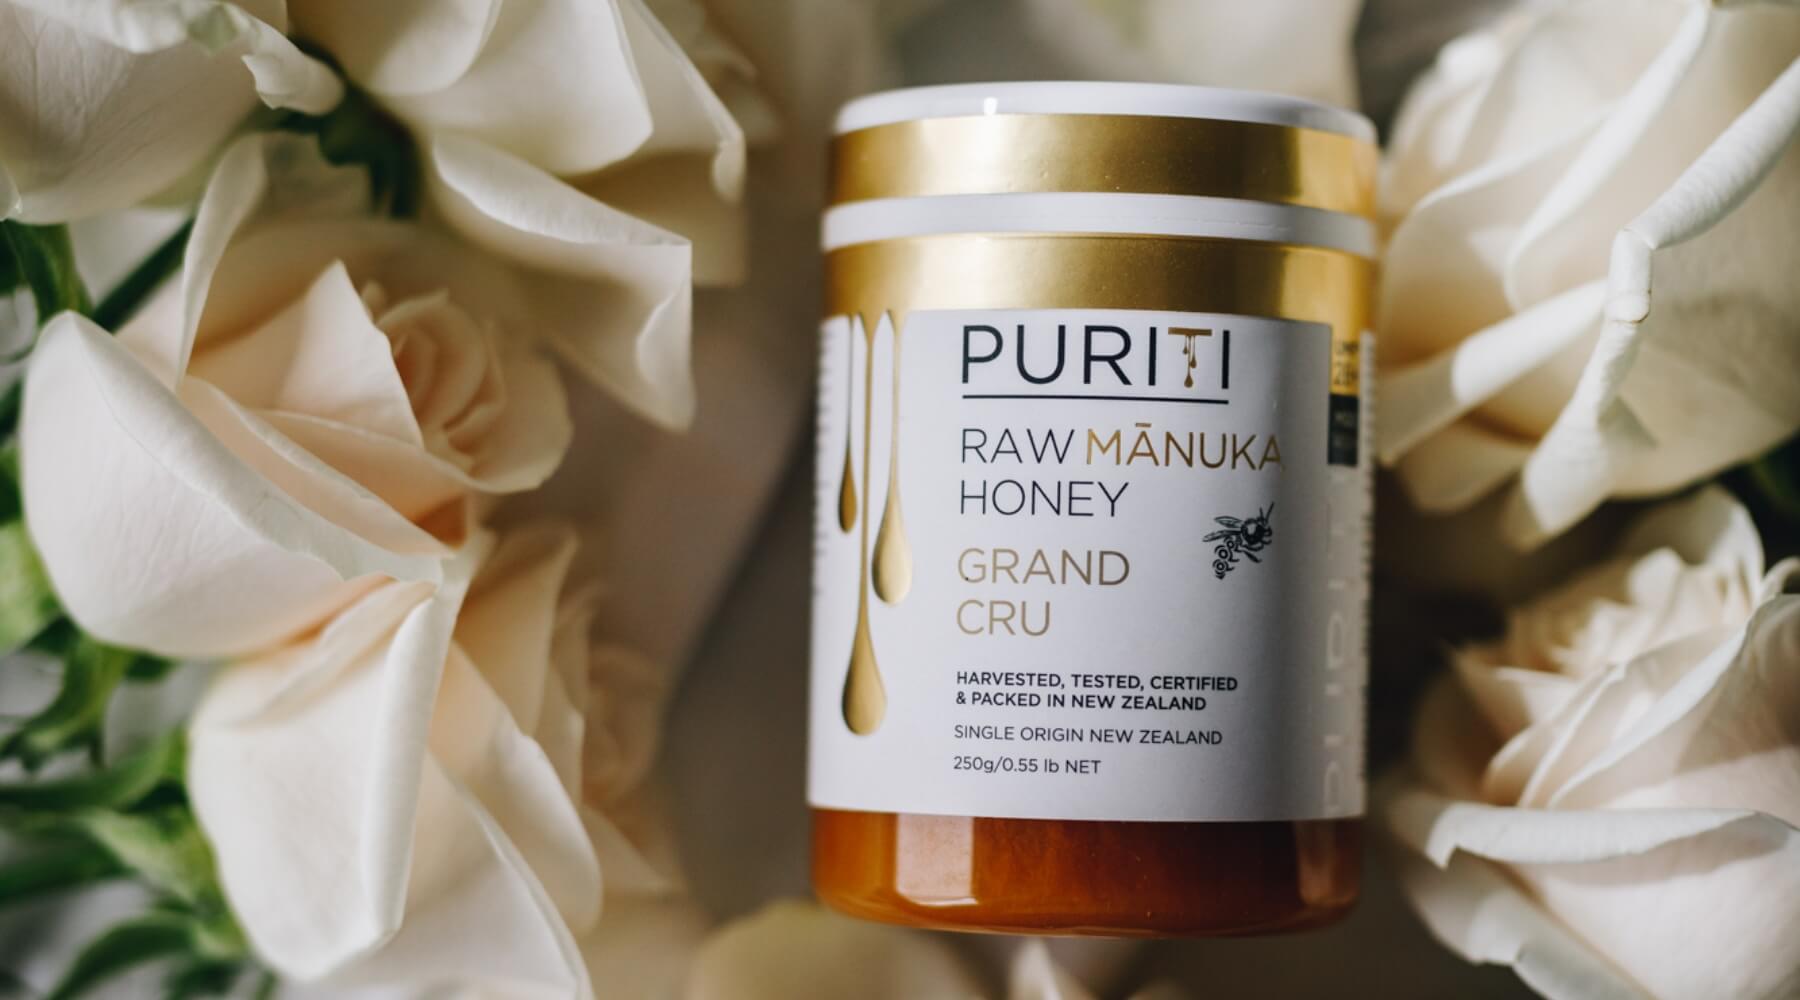 PURITI Offers Some Of The Sweetest Substances On Earth - PURITI